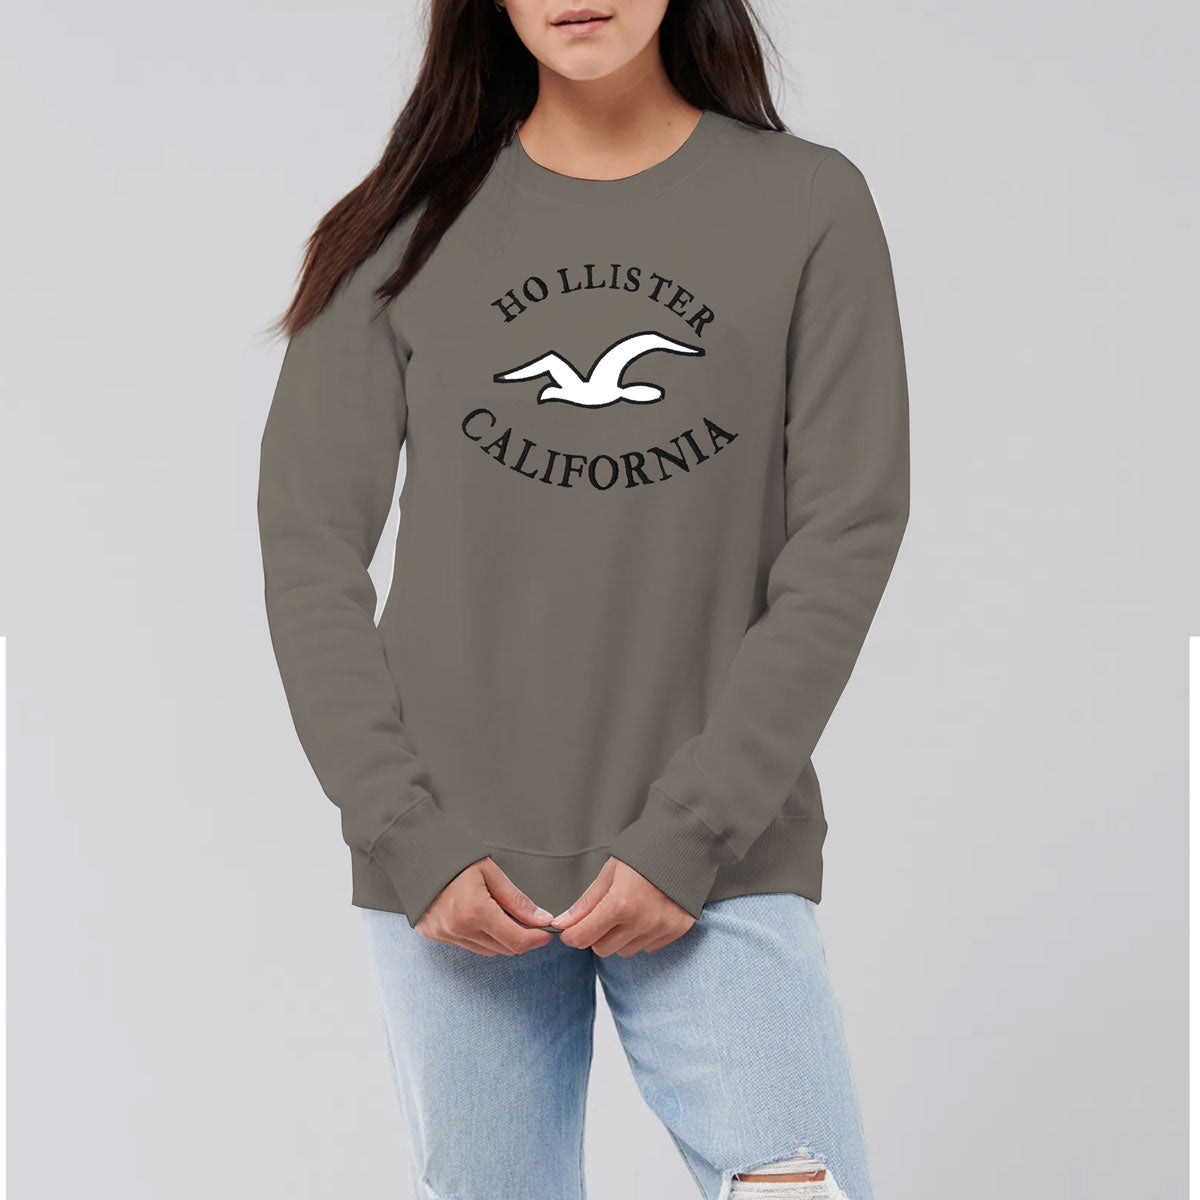 Appligue Embroidered Women Sweat Shirt